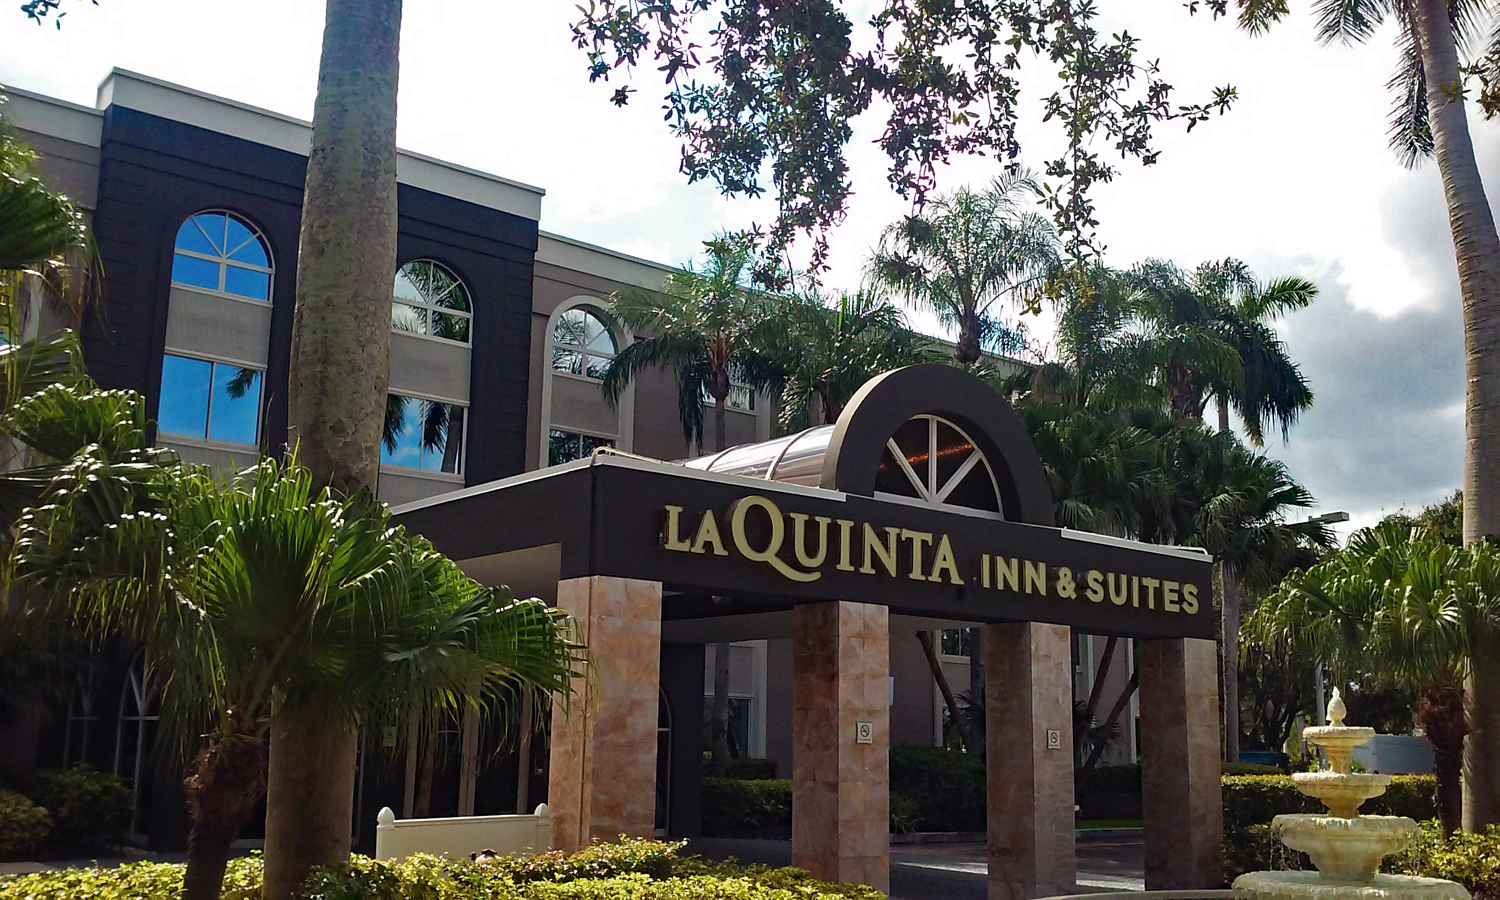 Coral Springs La Quinta Hotels Get Facelifts After Wyndham Acquisition